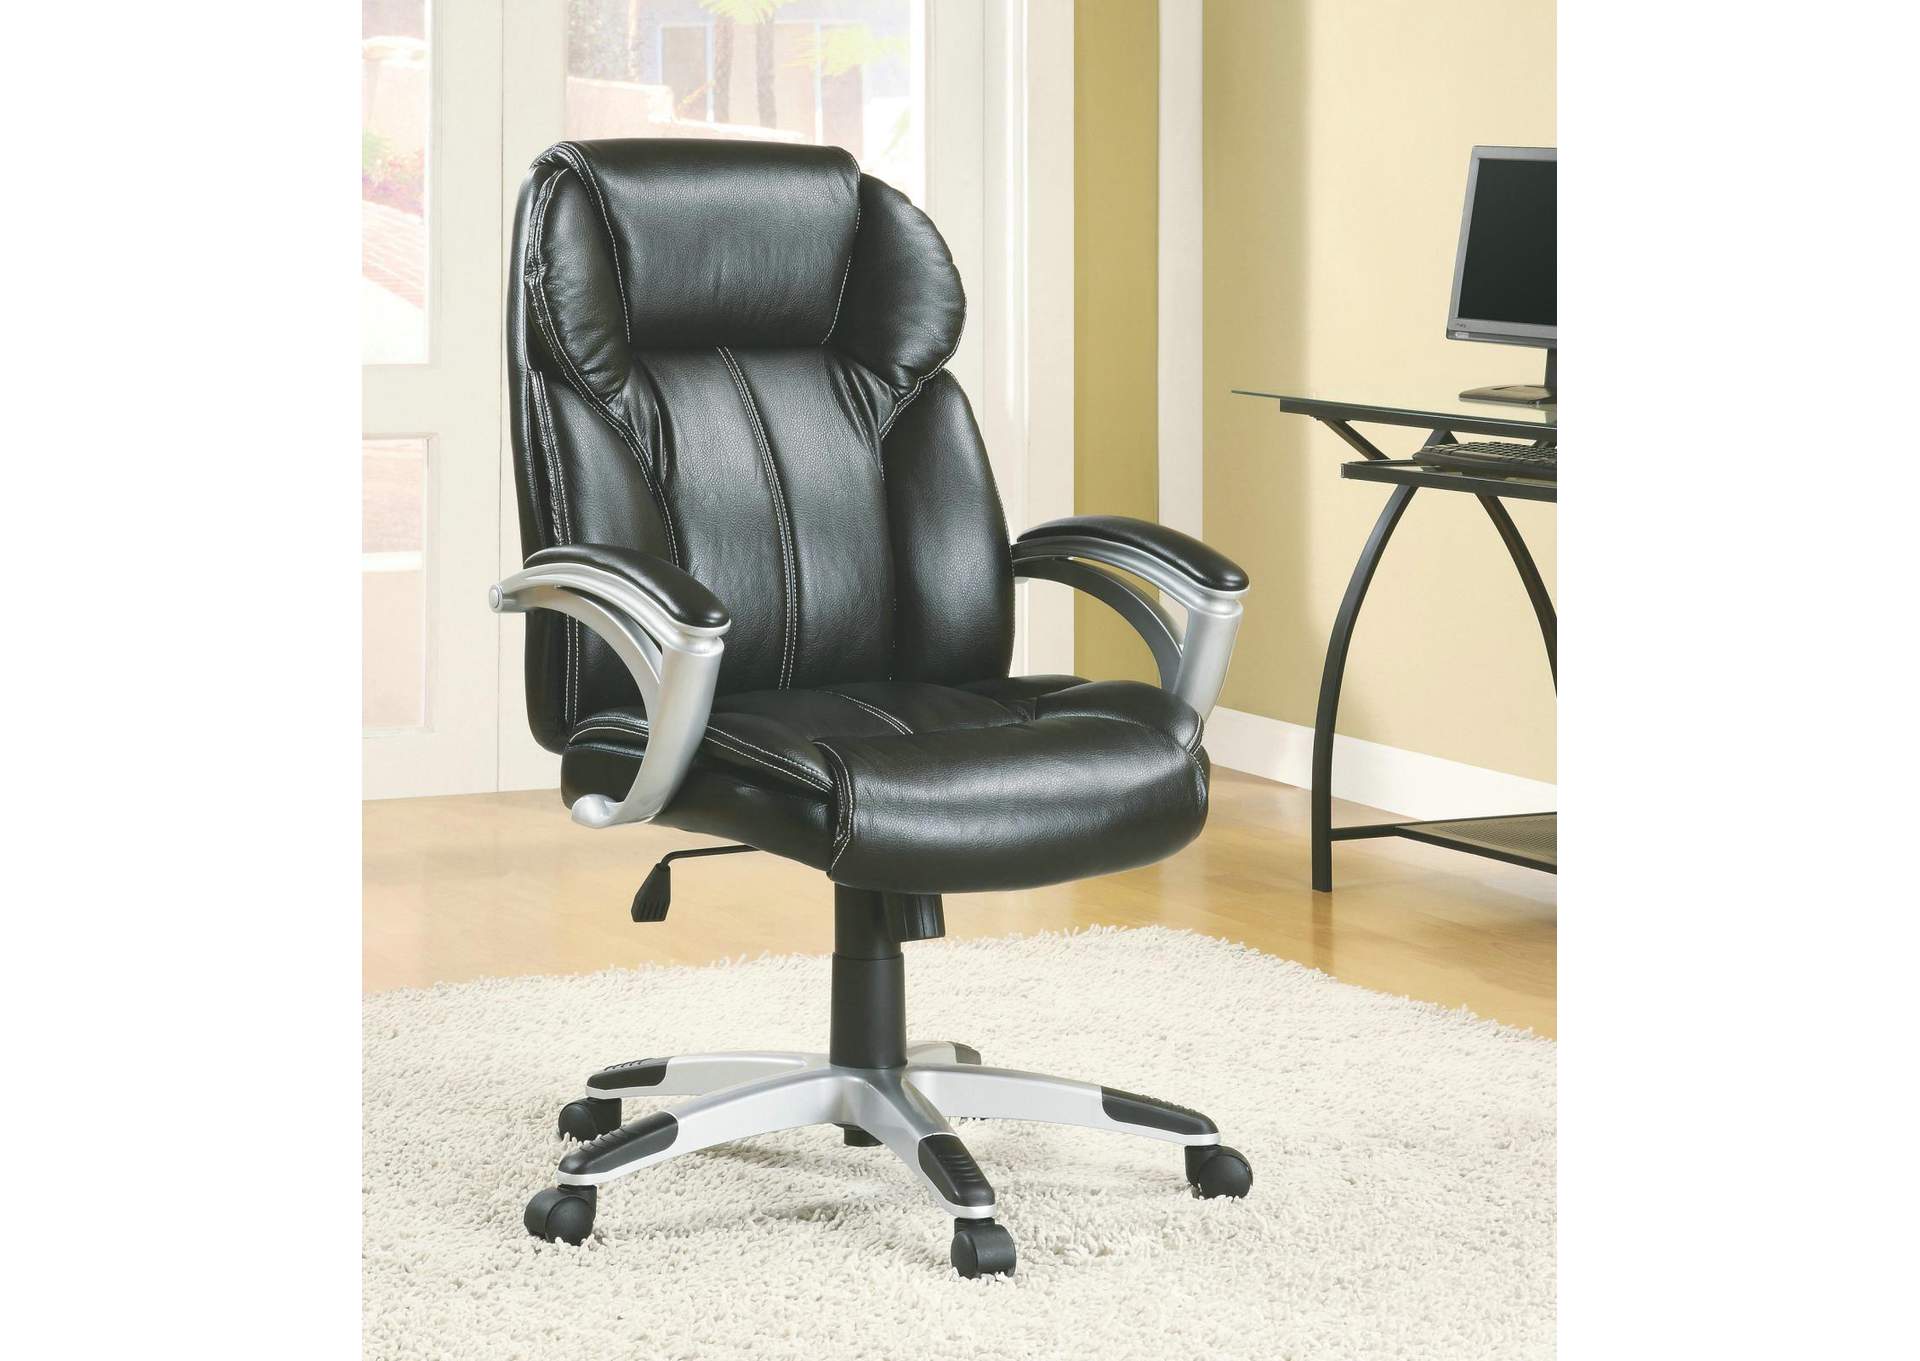 Transitional Black Office Chair Best Buy Furniture And Mattress